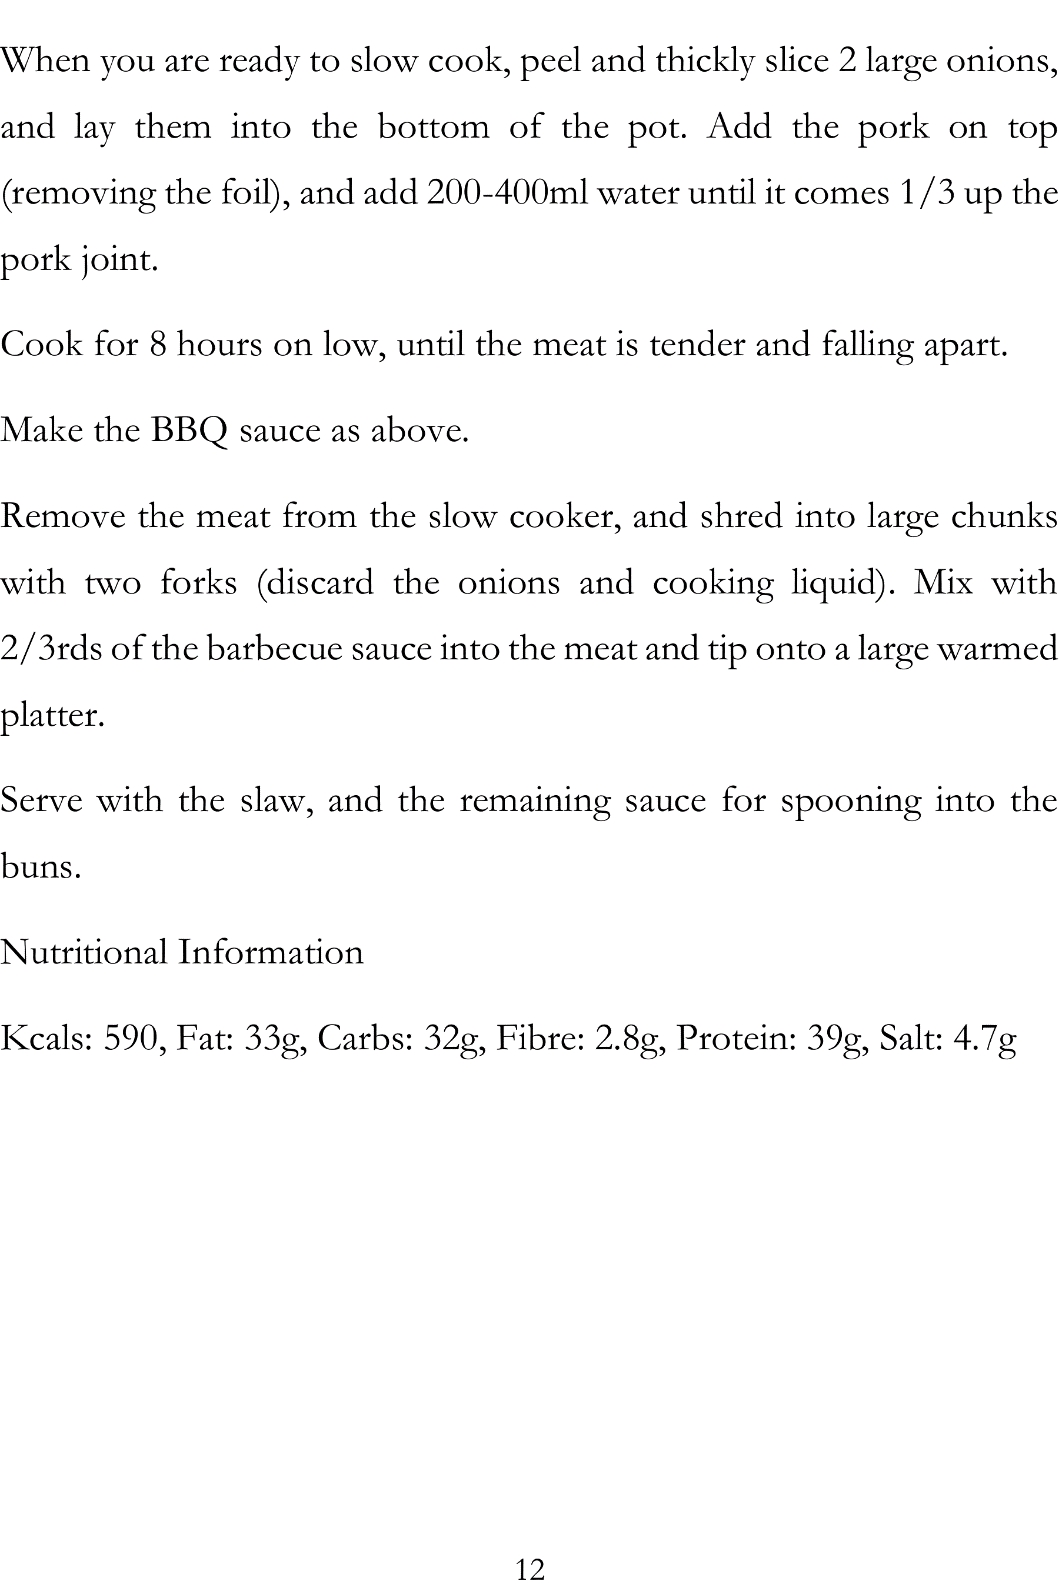 Barbecue and Grilling Recipes Making Perfect BBQ for Meals Barbecue Cookbook - photo 13